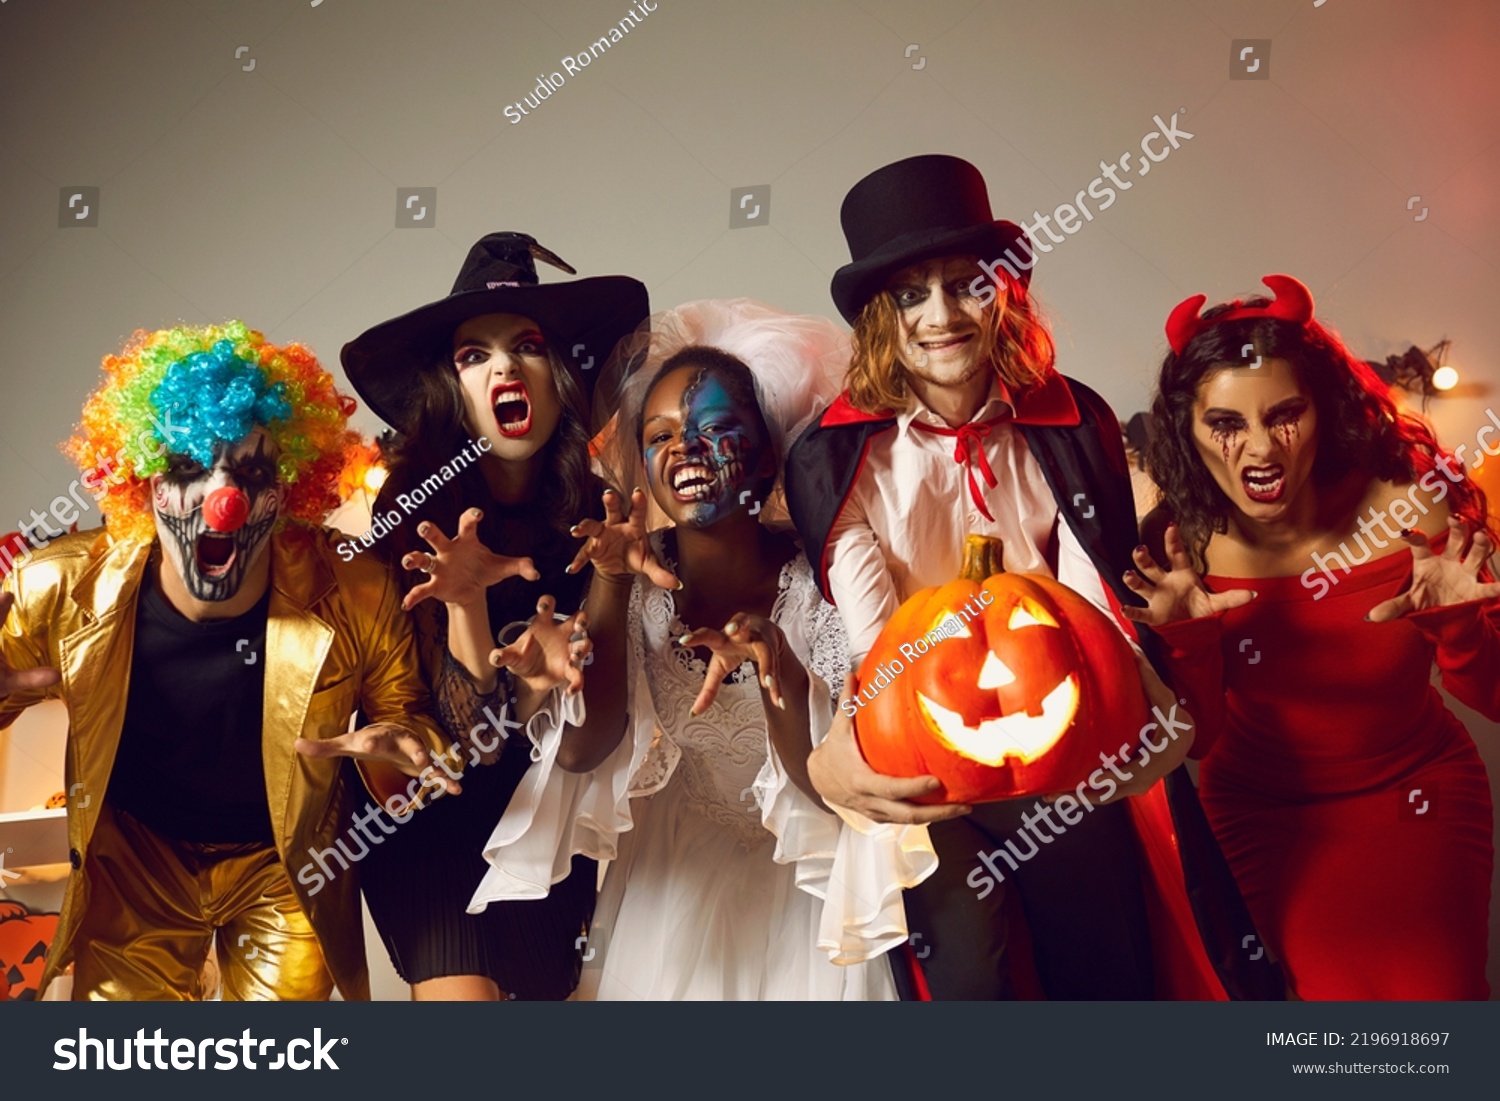 Group of young people dressed up as spooky characters having fun at Halloween costume party. Adult male and female friends with scary makeup on faces doing claw gesture, hissing and making grimaces #2196918697